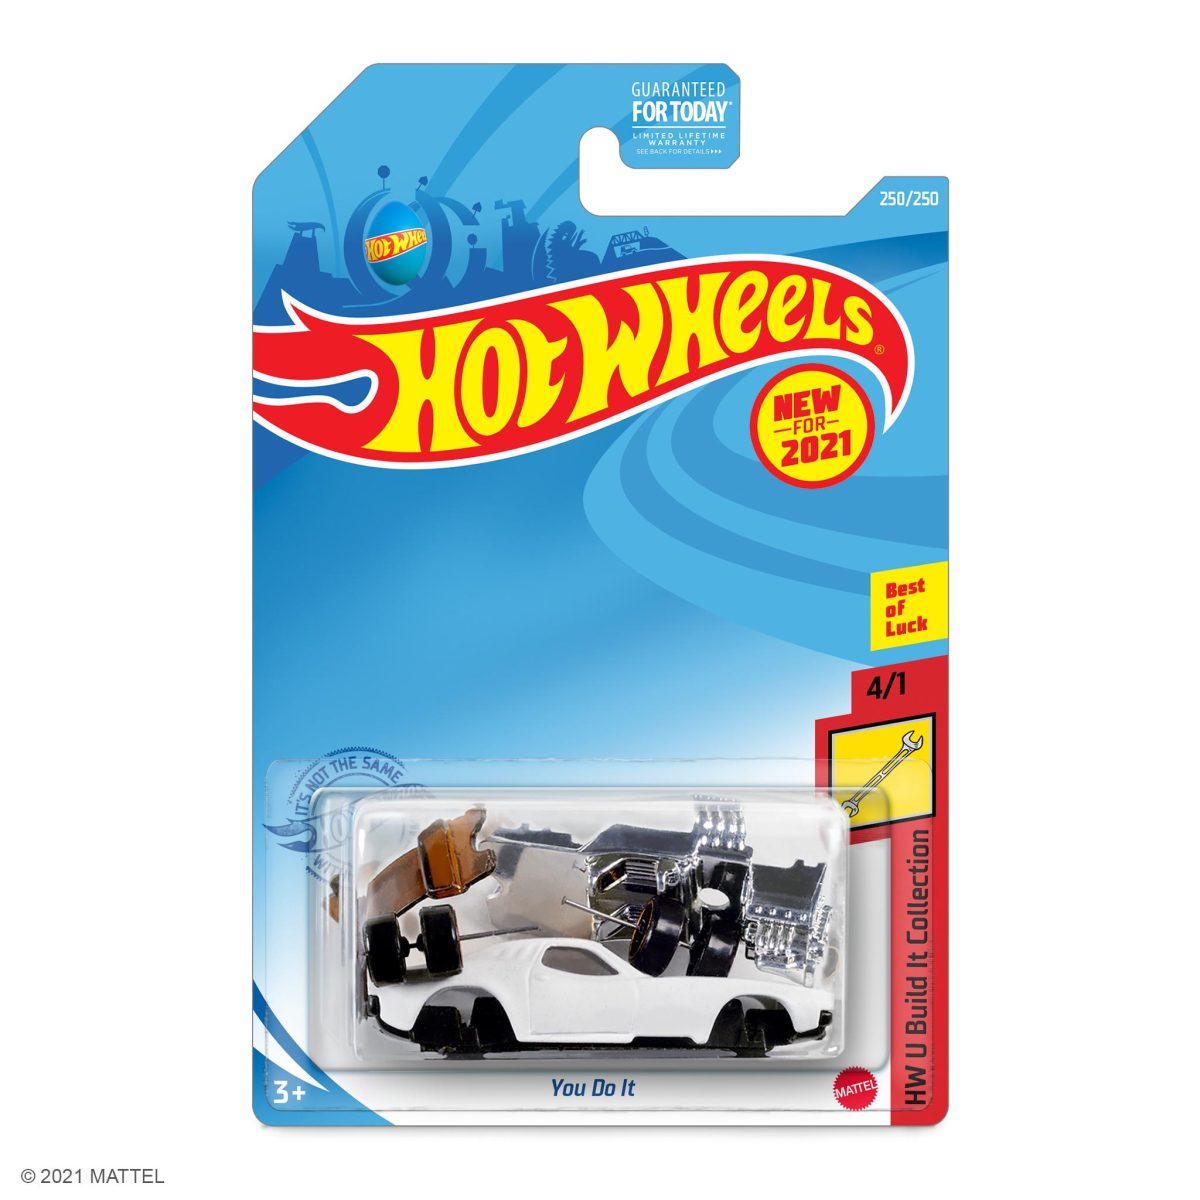 Even Mattel got in on April Fools' Day with it's do-it-yourself Hot Wheels. 